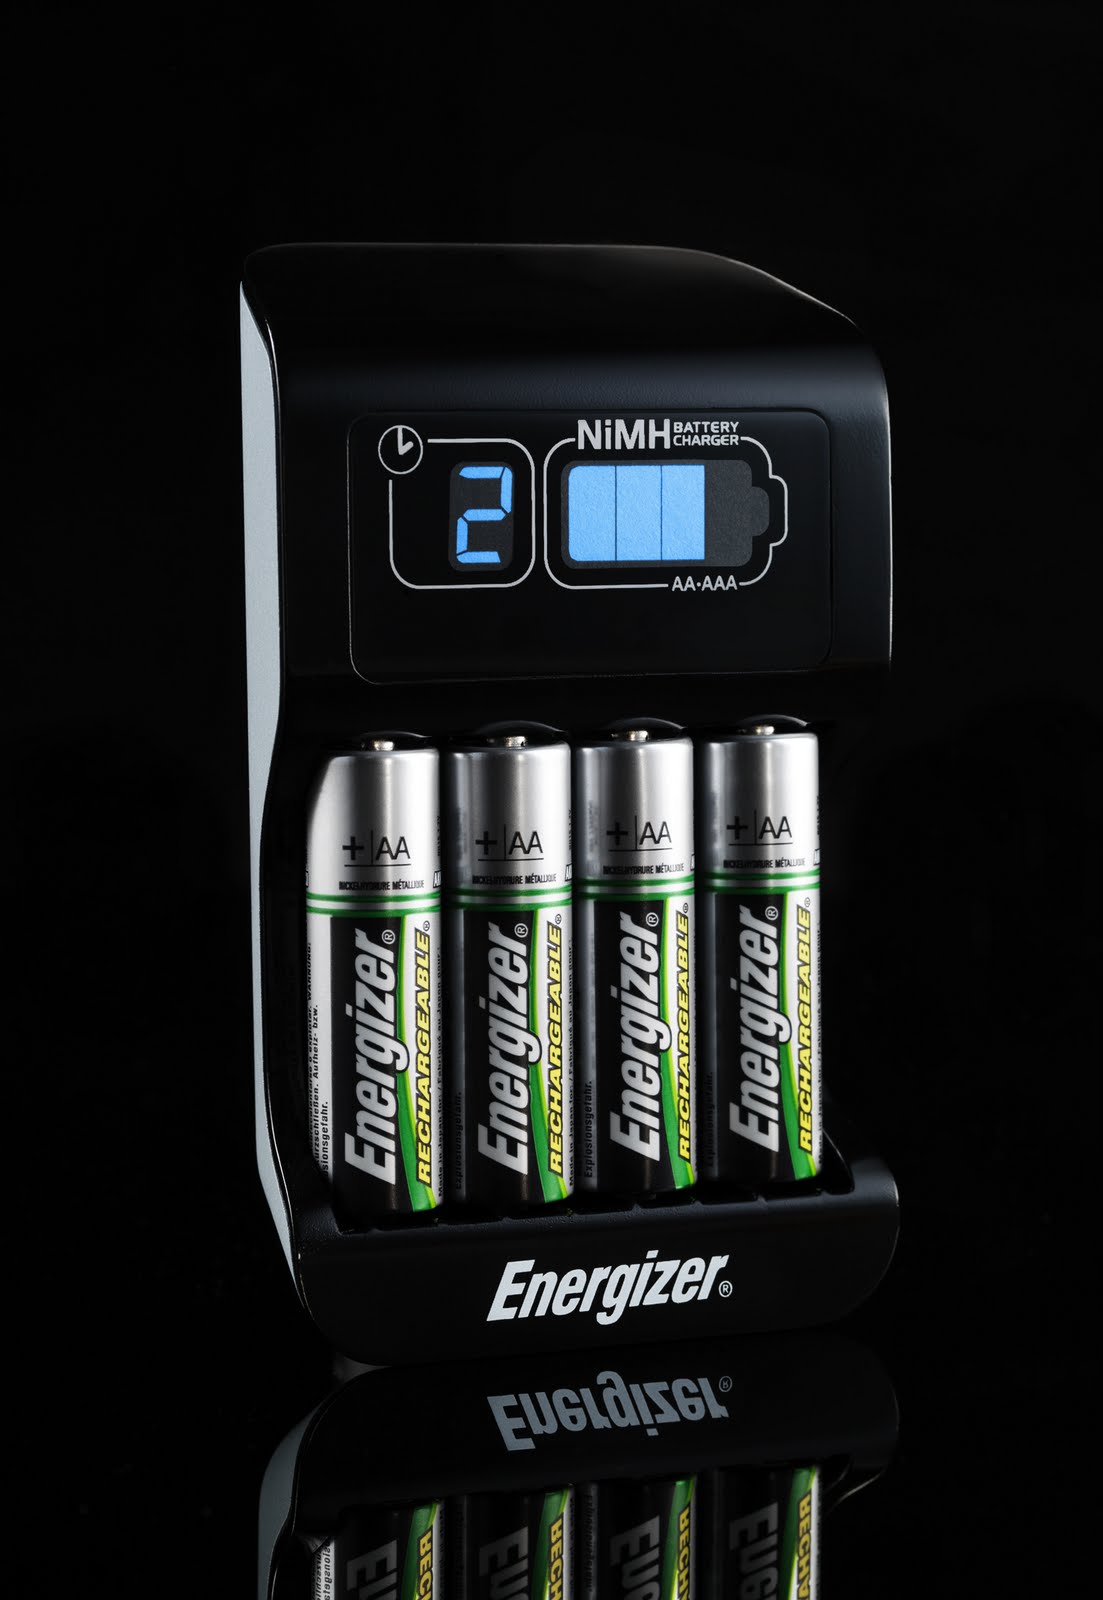 Energizer Recharge Smart Charger Review ~ The Review Stew